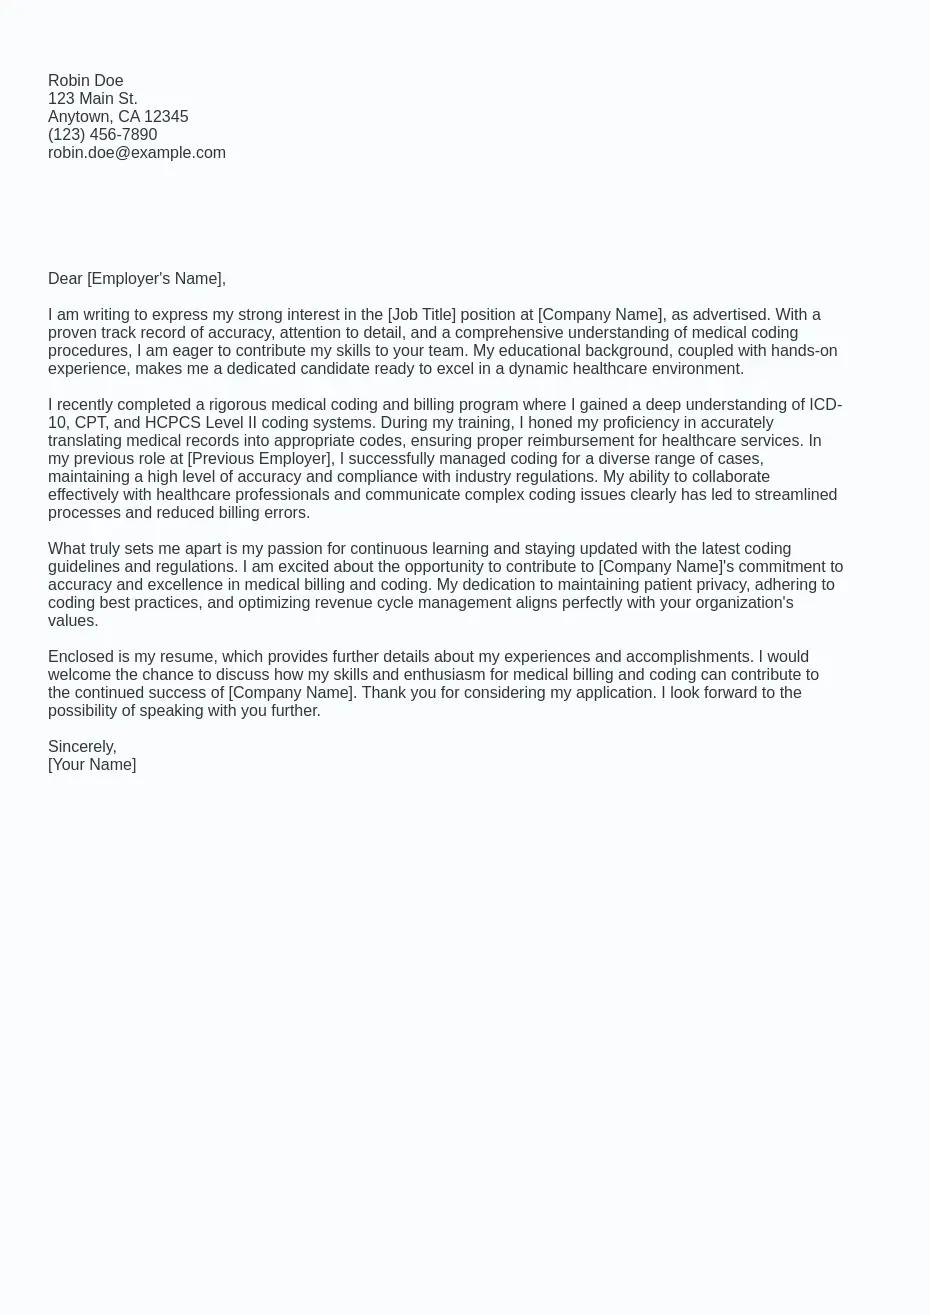 Example of a professional cover letter for a job applicant seeking a Medical Billing And Coding job in 2024, showcasing a structured format with placeholders for personalization and detailed expression of interest in the position.